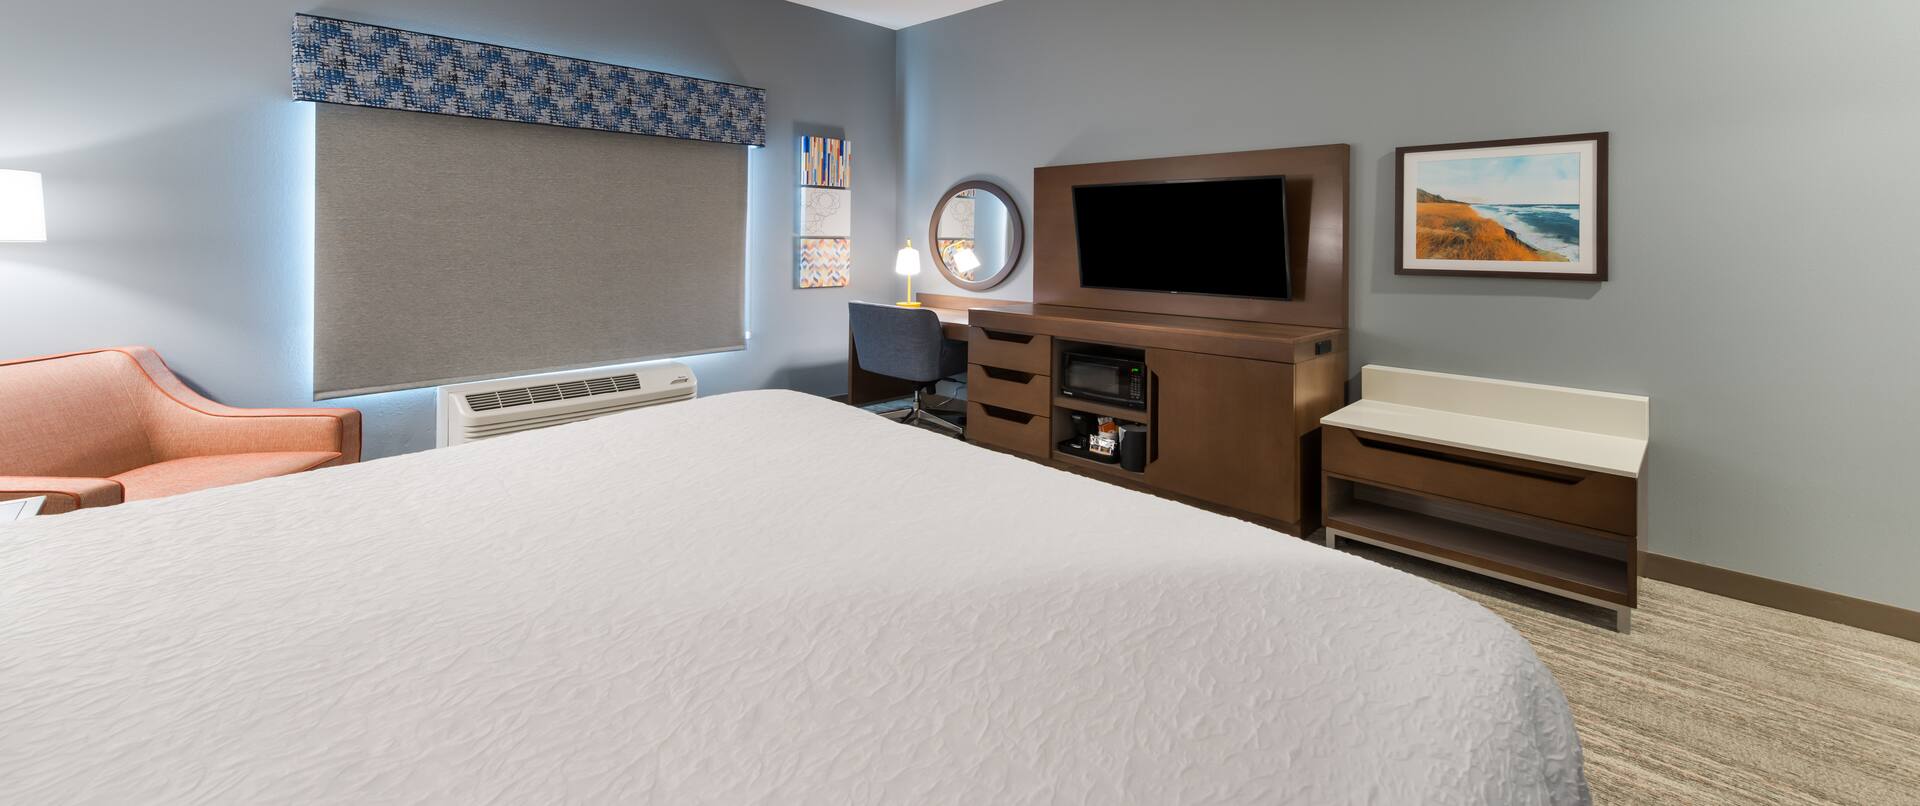 HDTV Desk and Large Bed in Hotel Guest Room